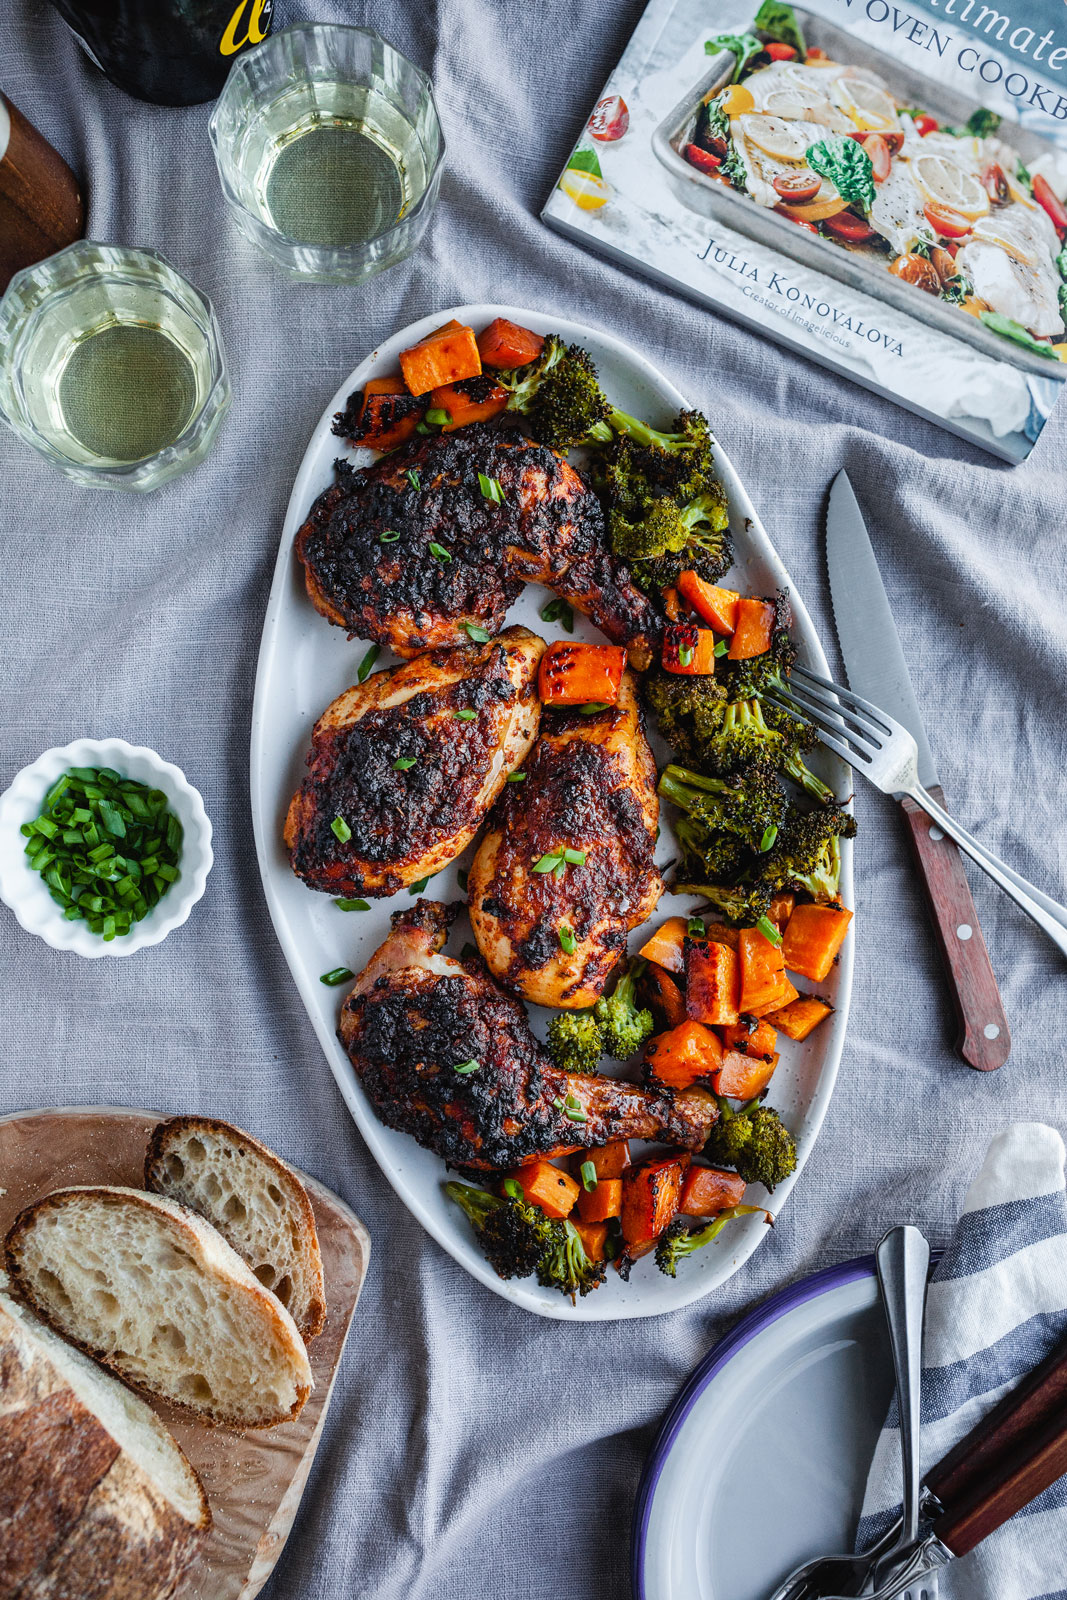 Spicy Blackened Chicken Legs With Sweet Potatoes and Broccoli